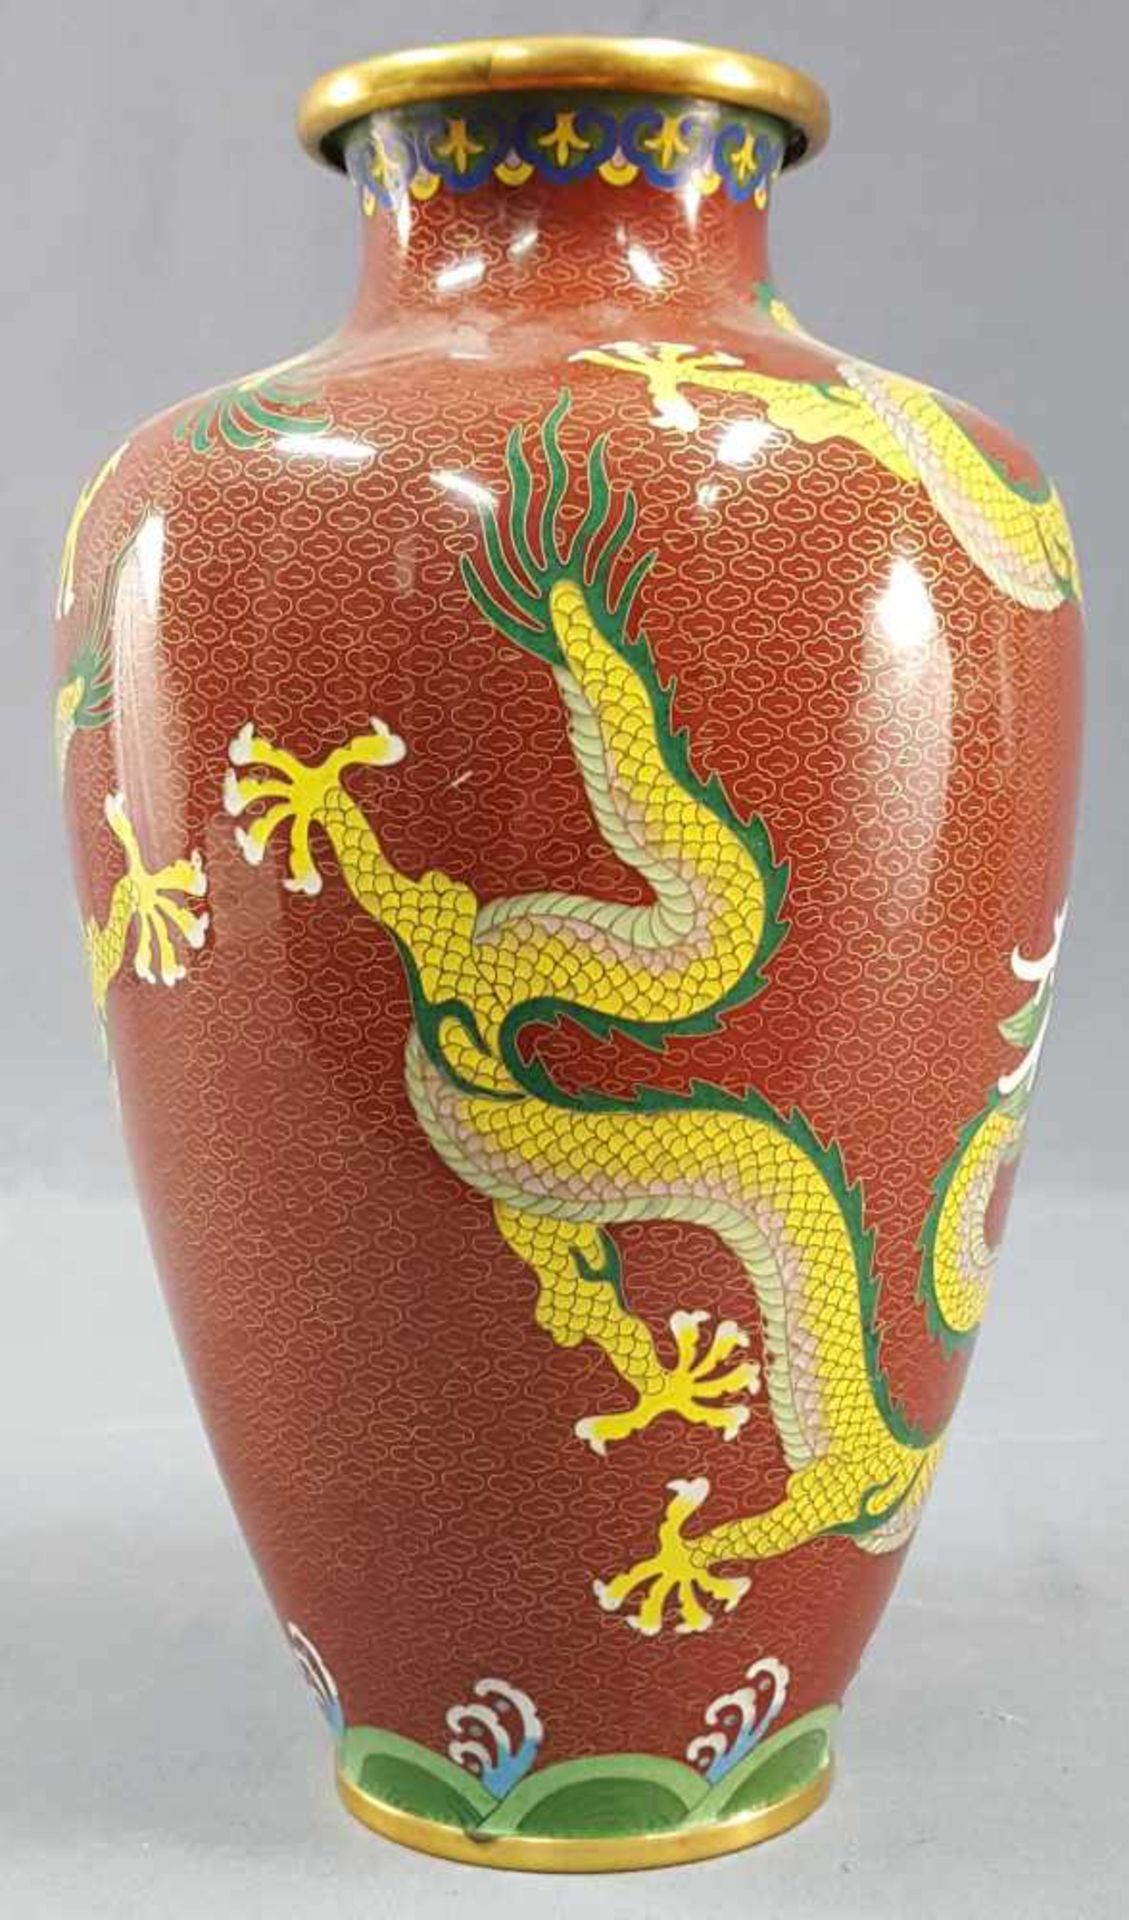 Cloisonne vase with imperial yellow dragon. - Image 2 of 6